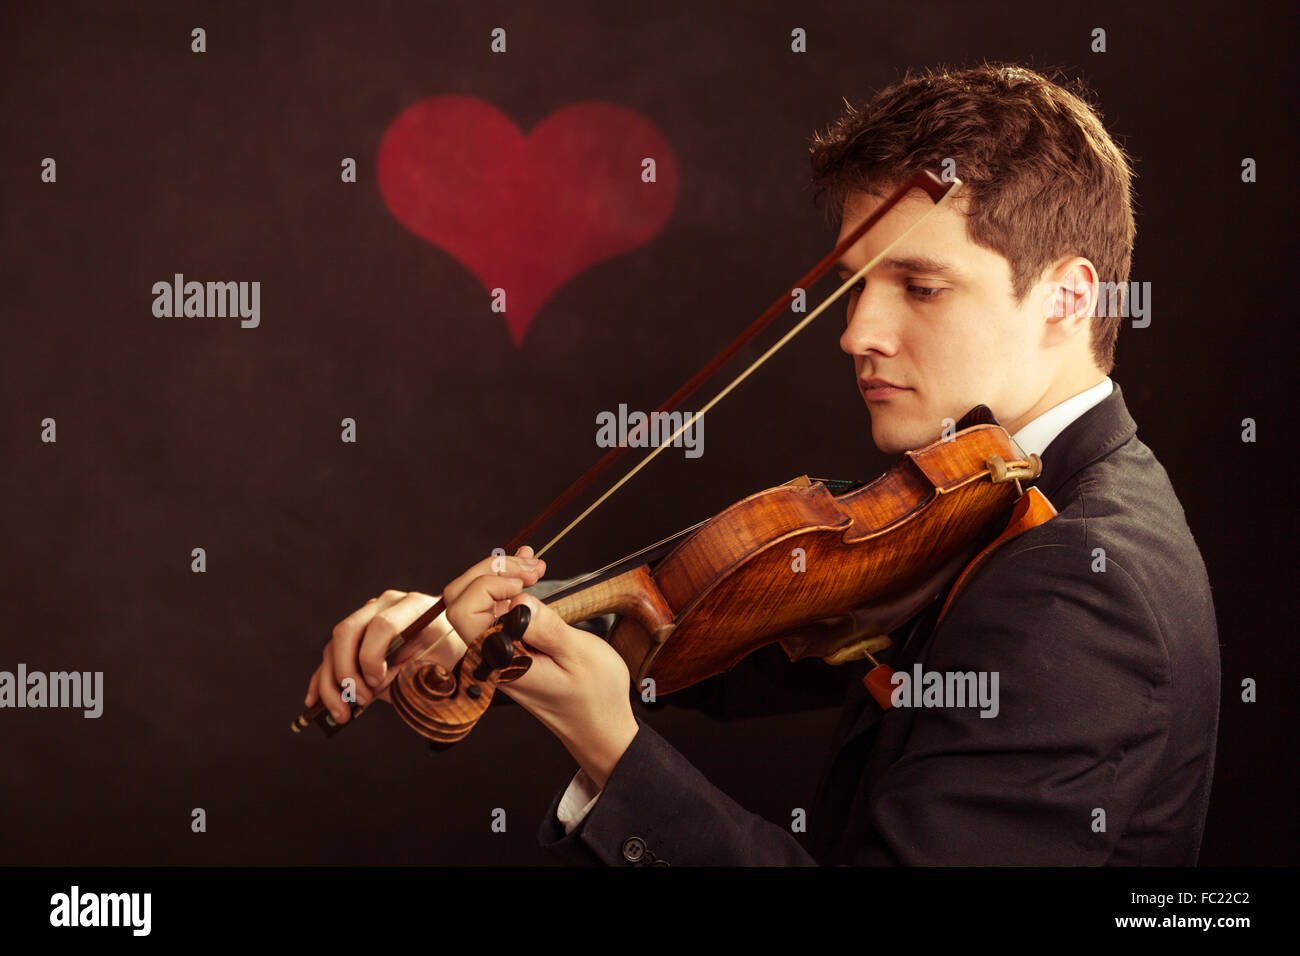 Man violinist playing violin. Classical music art Stock Photo